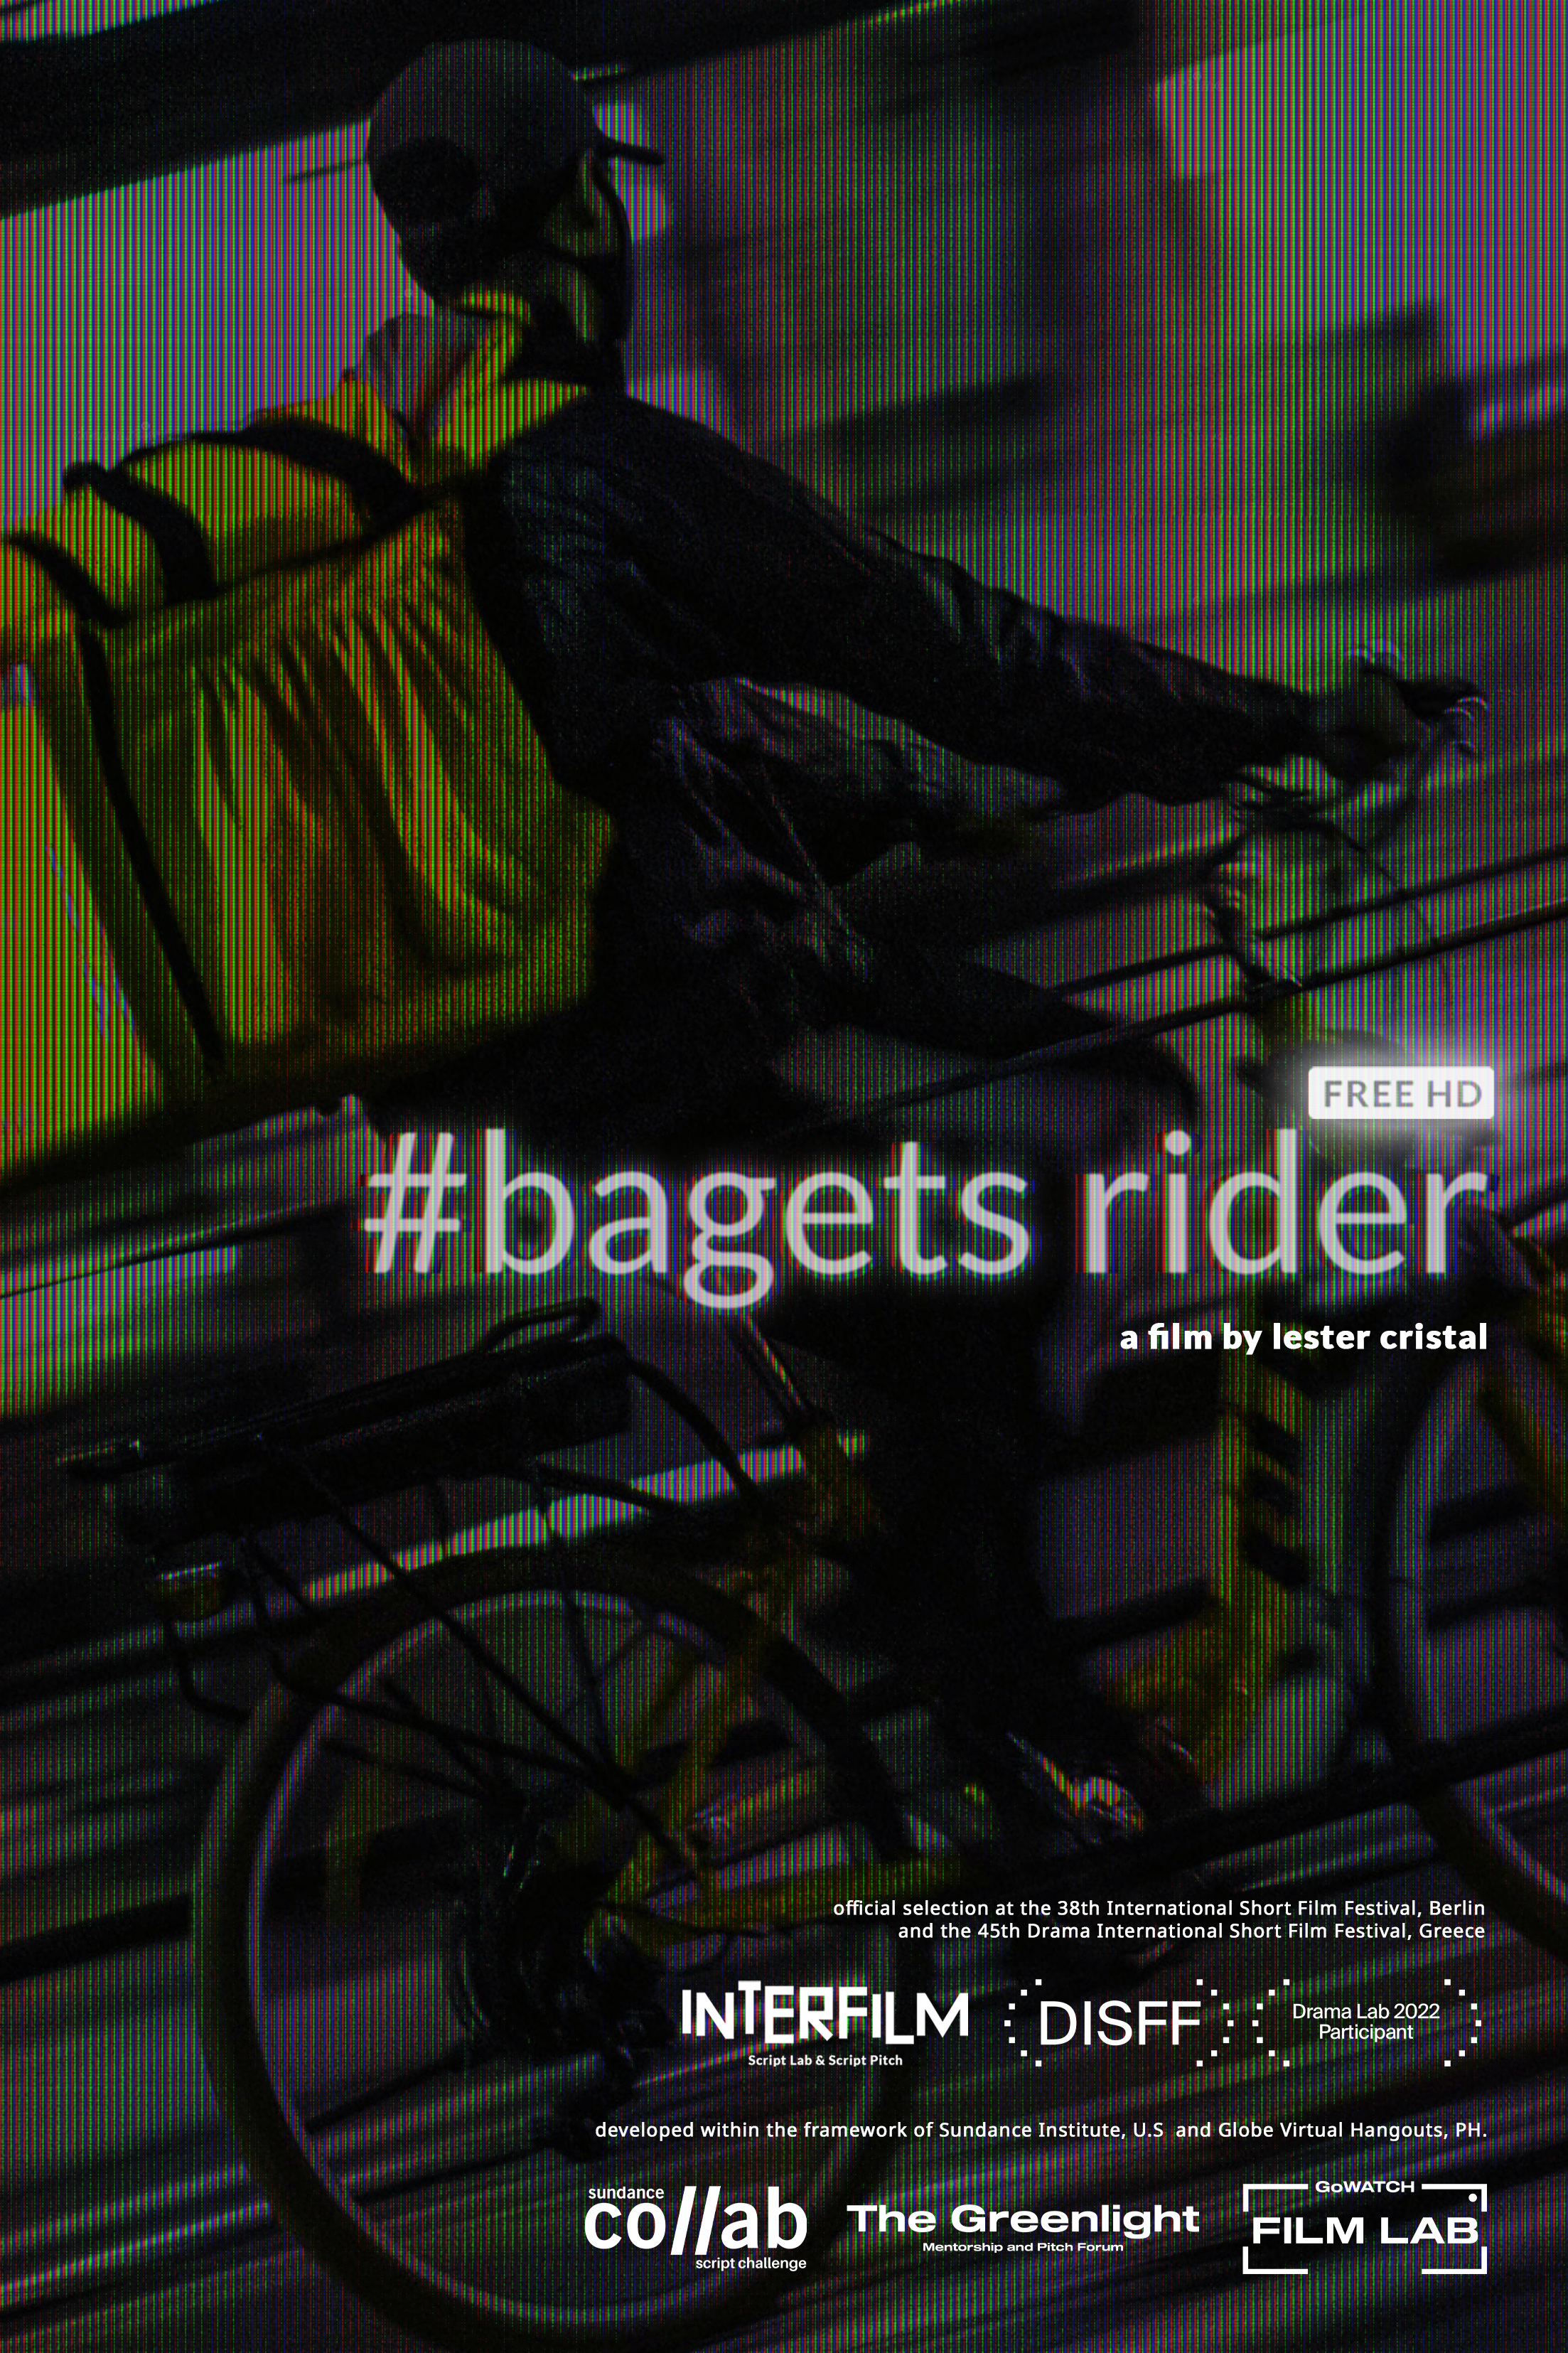 #bagets Rider Free Hd   Poster